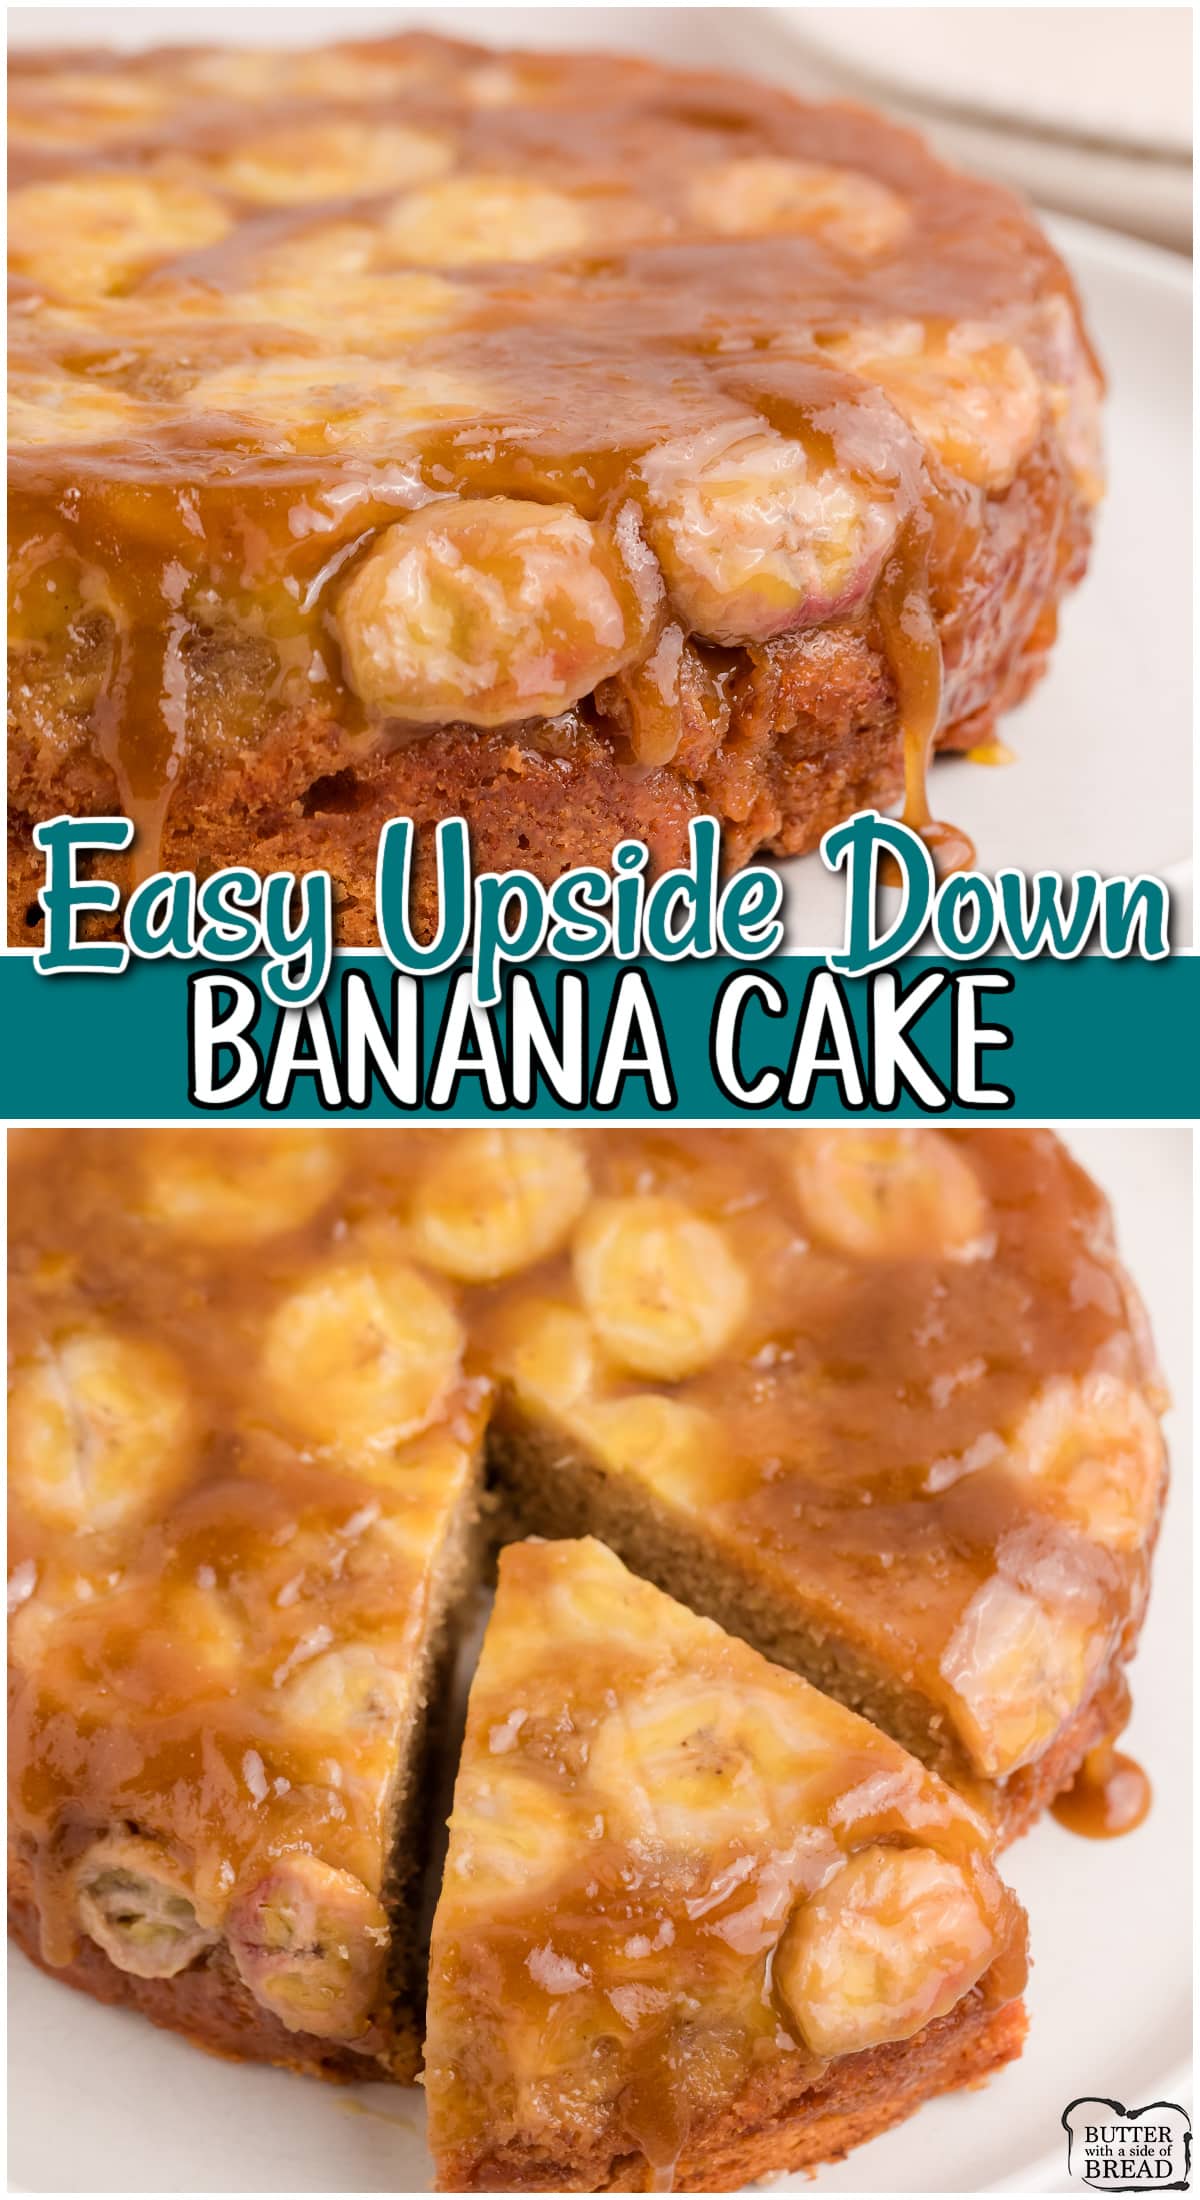 Banana Upside Down Cake made with ripe bananas, brown sugar, and butter, which creates a caramelized topping that is irresistible! Perfect banana recipe for when you have ripe bananas to use up!